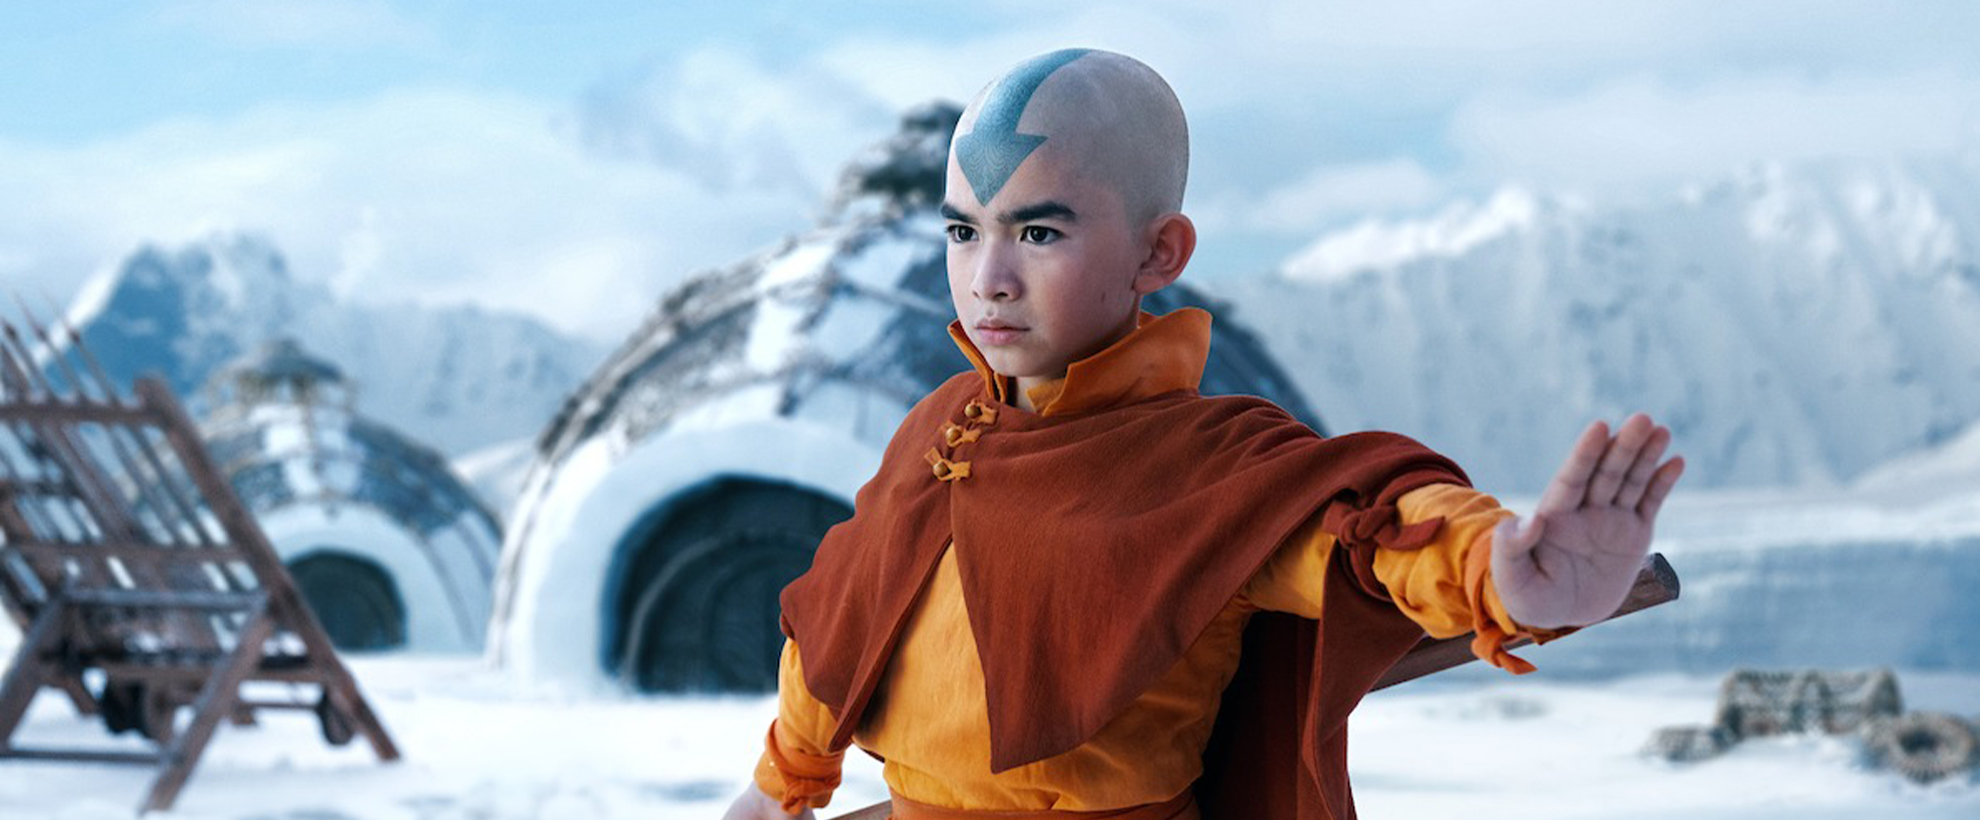 A young boy wearing orange robes, with a blue arrow painted on his shaved head, standing in a snowscape